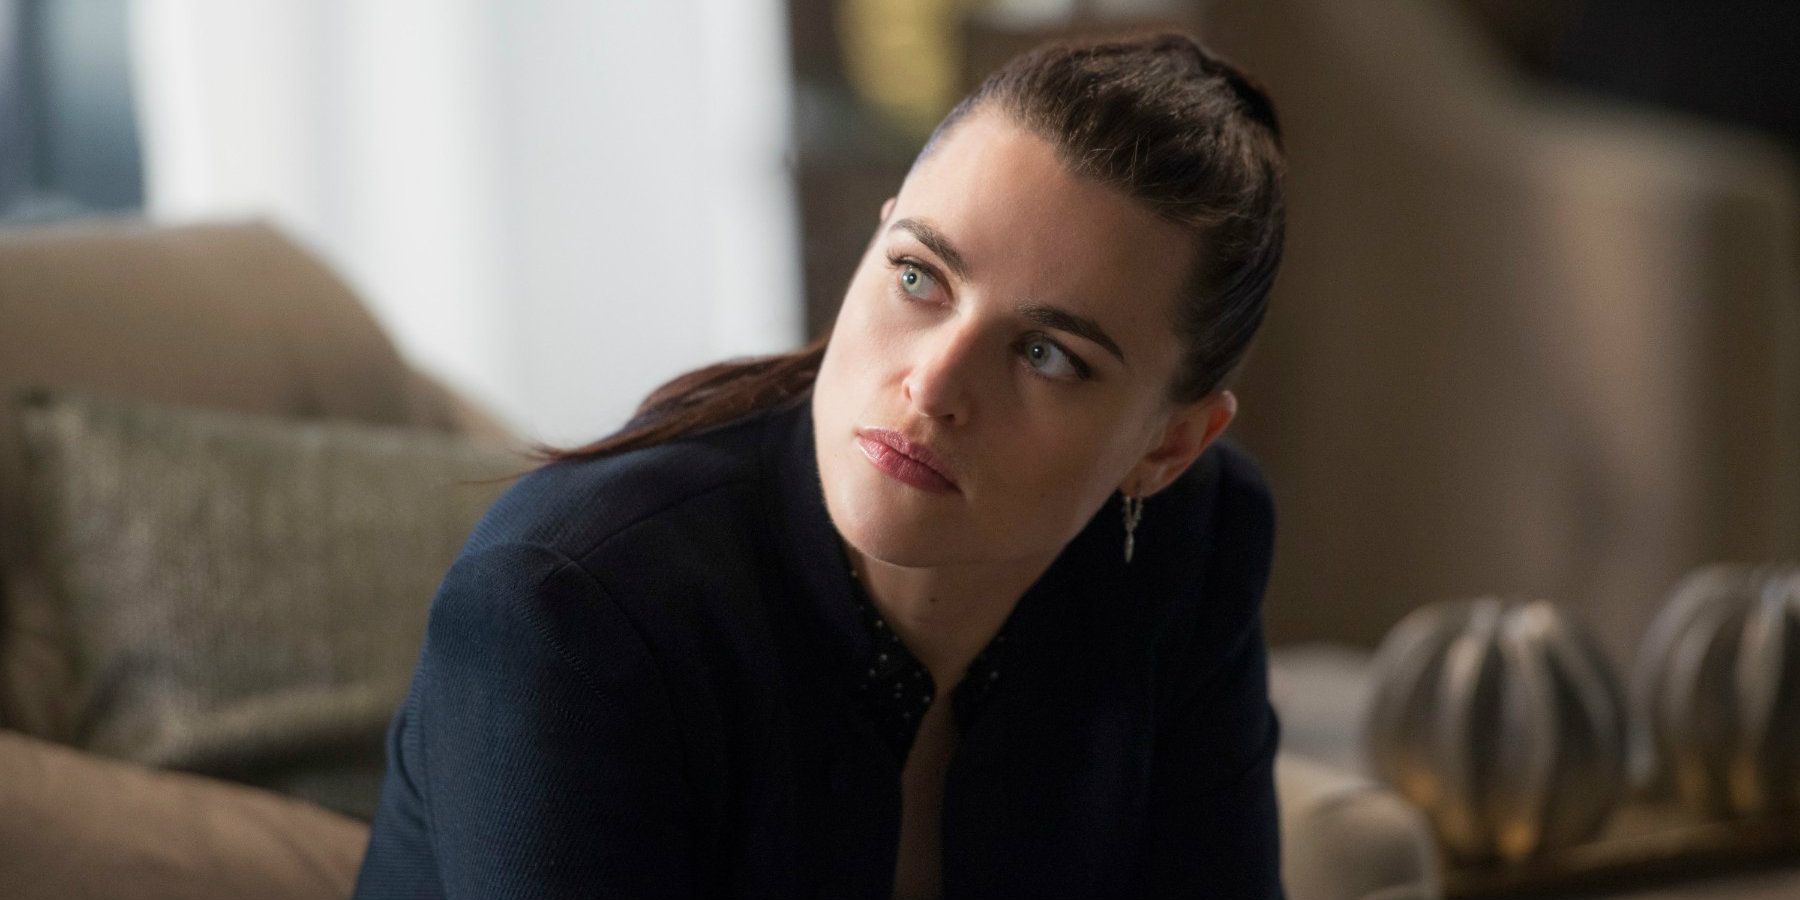 1. Hero People Hated: Lena Luthor From Supergirl- She became almost obsessed with her friendship with Kara and ended up more annoying than interesting.